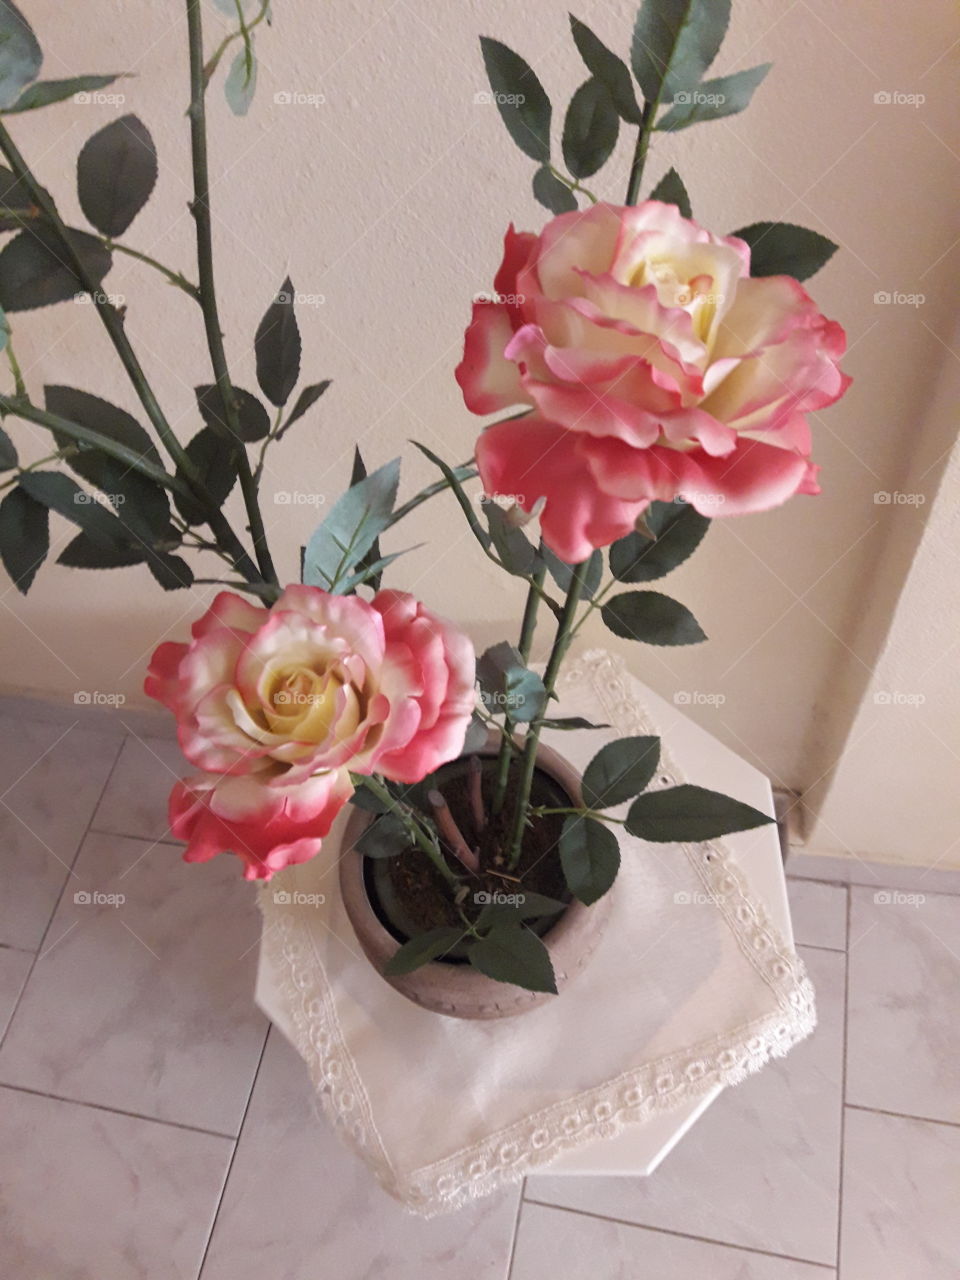 beutiful romantic rose pink yelow and white color